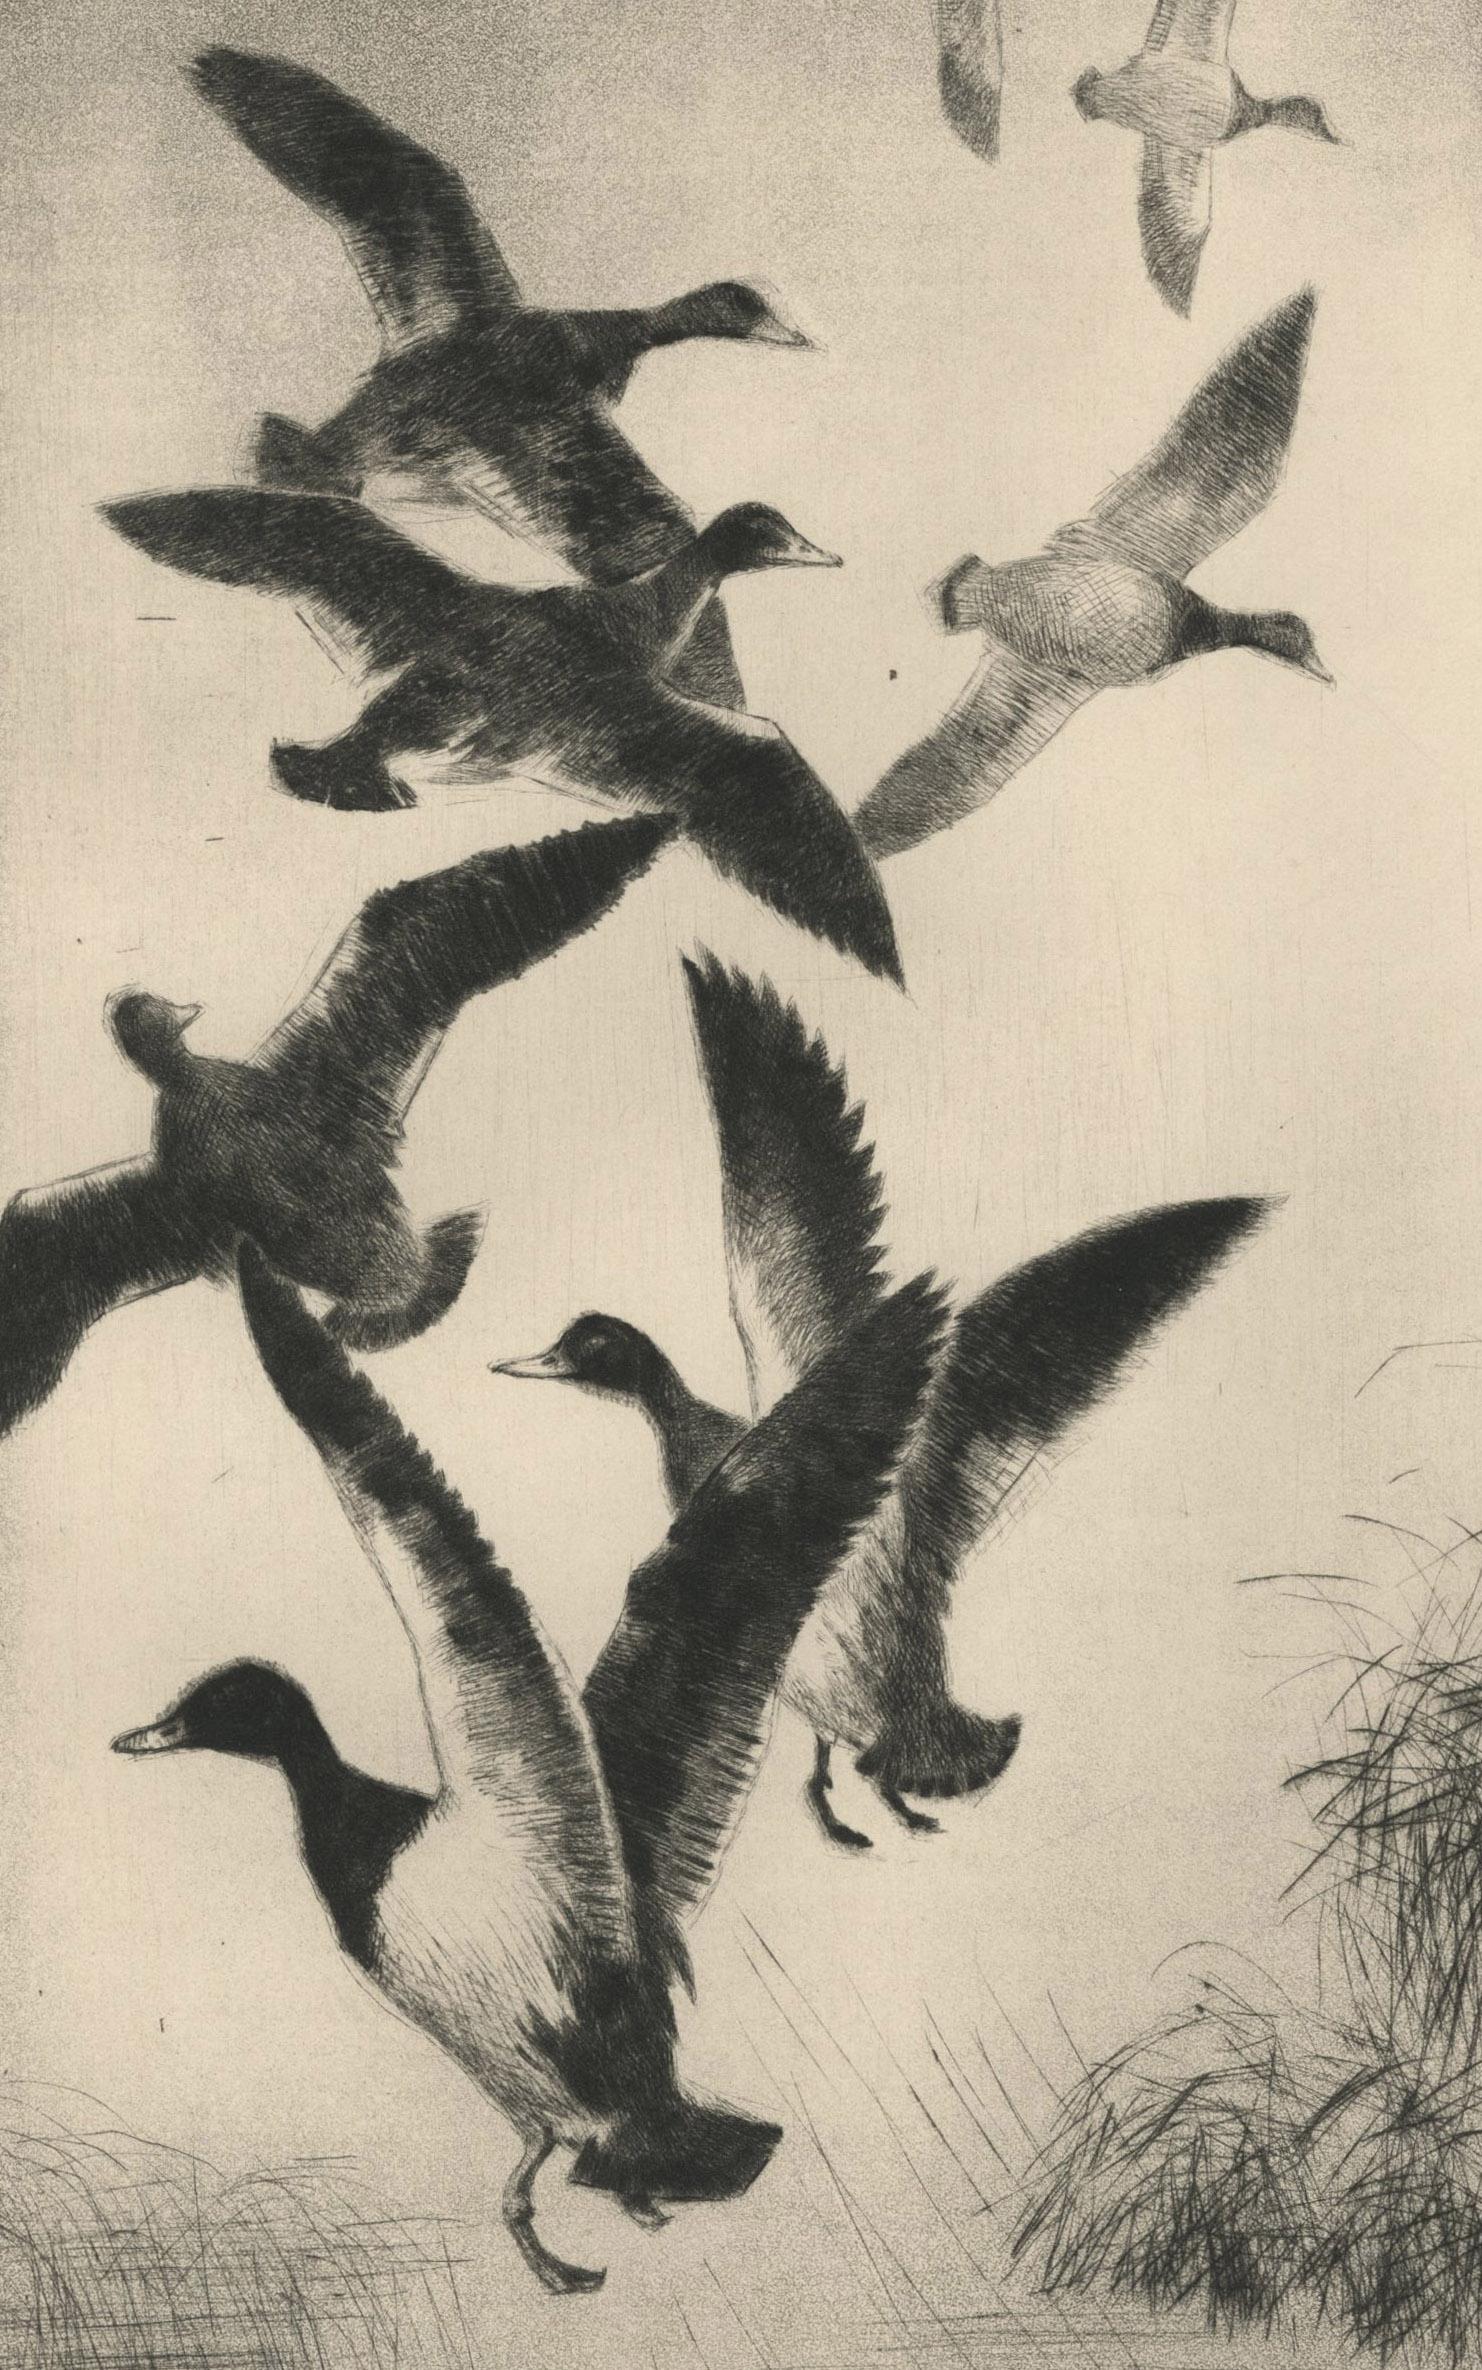 untitled (Duck taking to flight, flushed by a dog) - American Realist Print by Paul H. Winchell